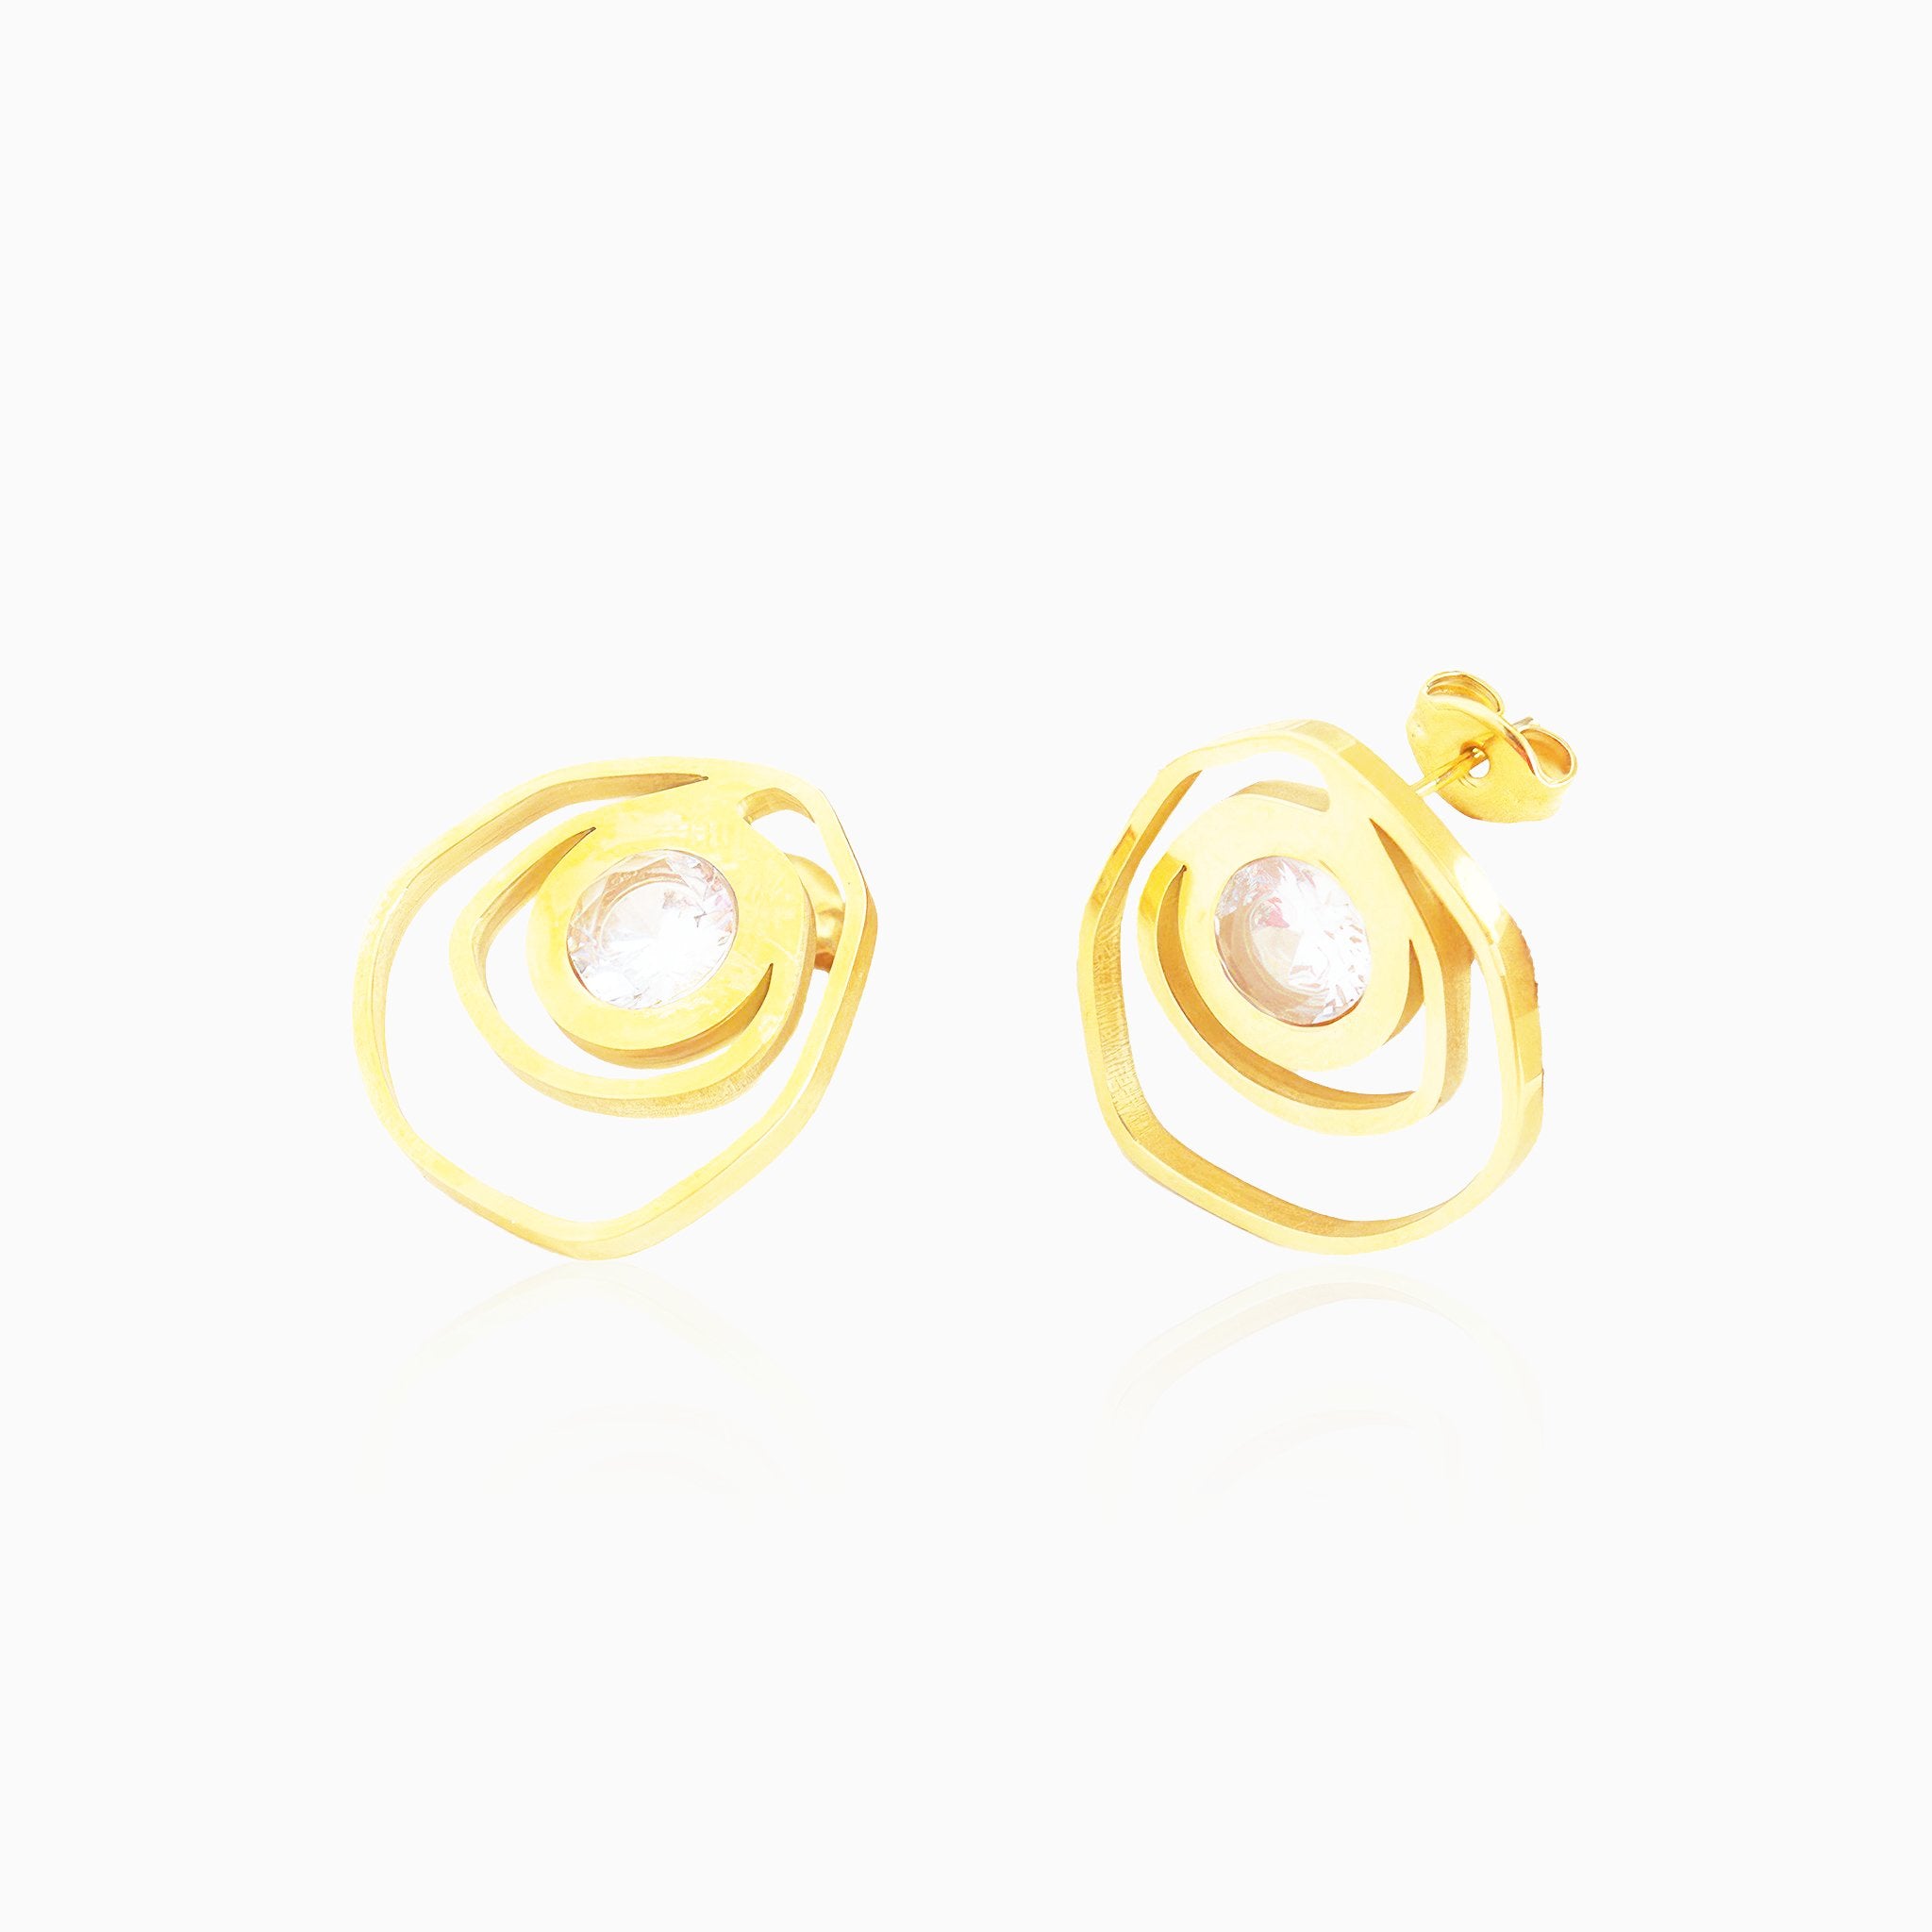 Irregular Hollow Earrings - Nobbier - Earring - 18K Gold And Titanium PVD Coated Jewelry